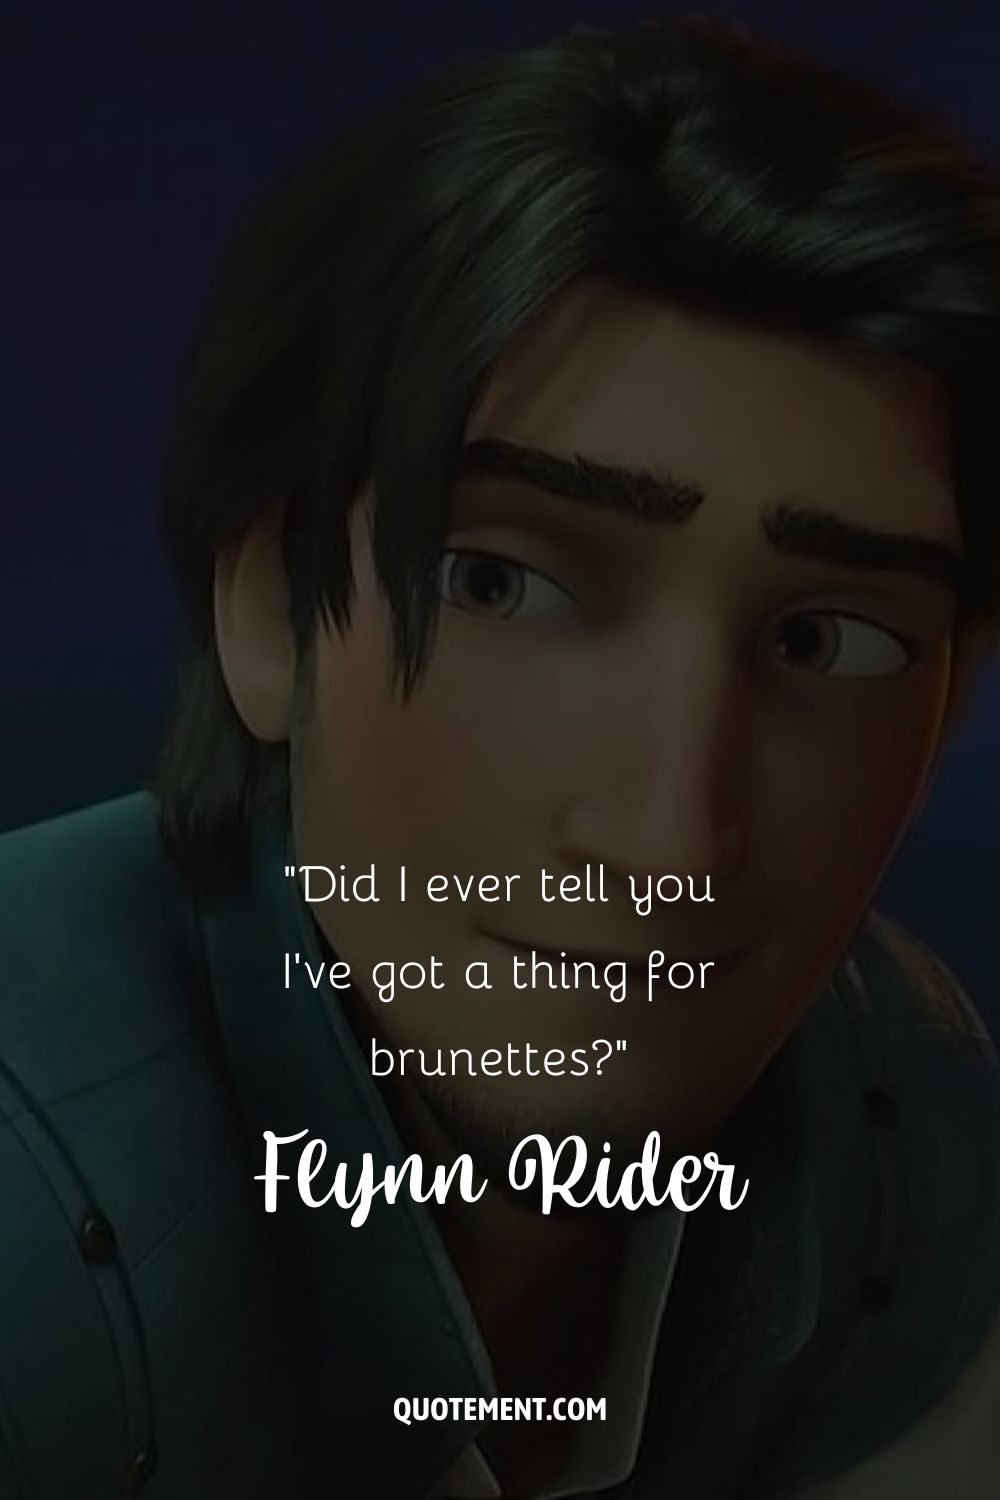 image of a dark haired cartoon prince representing quote by flynn rider